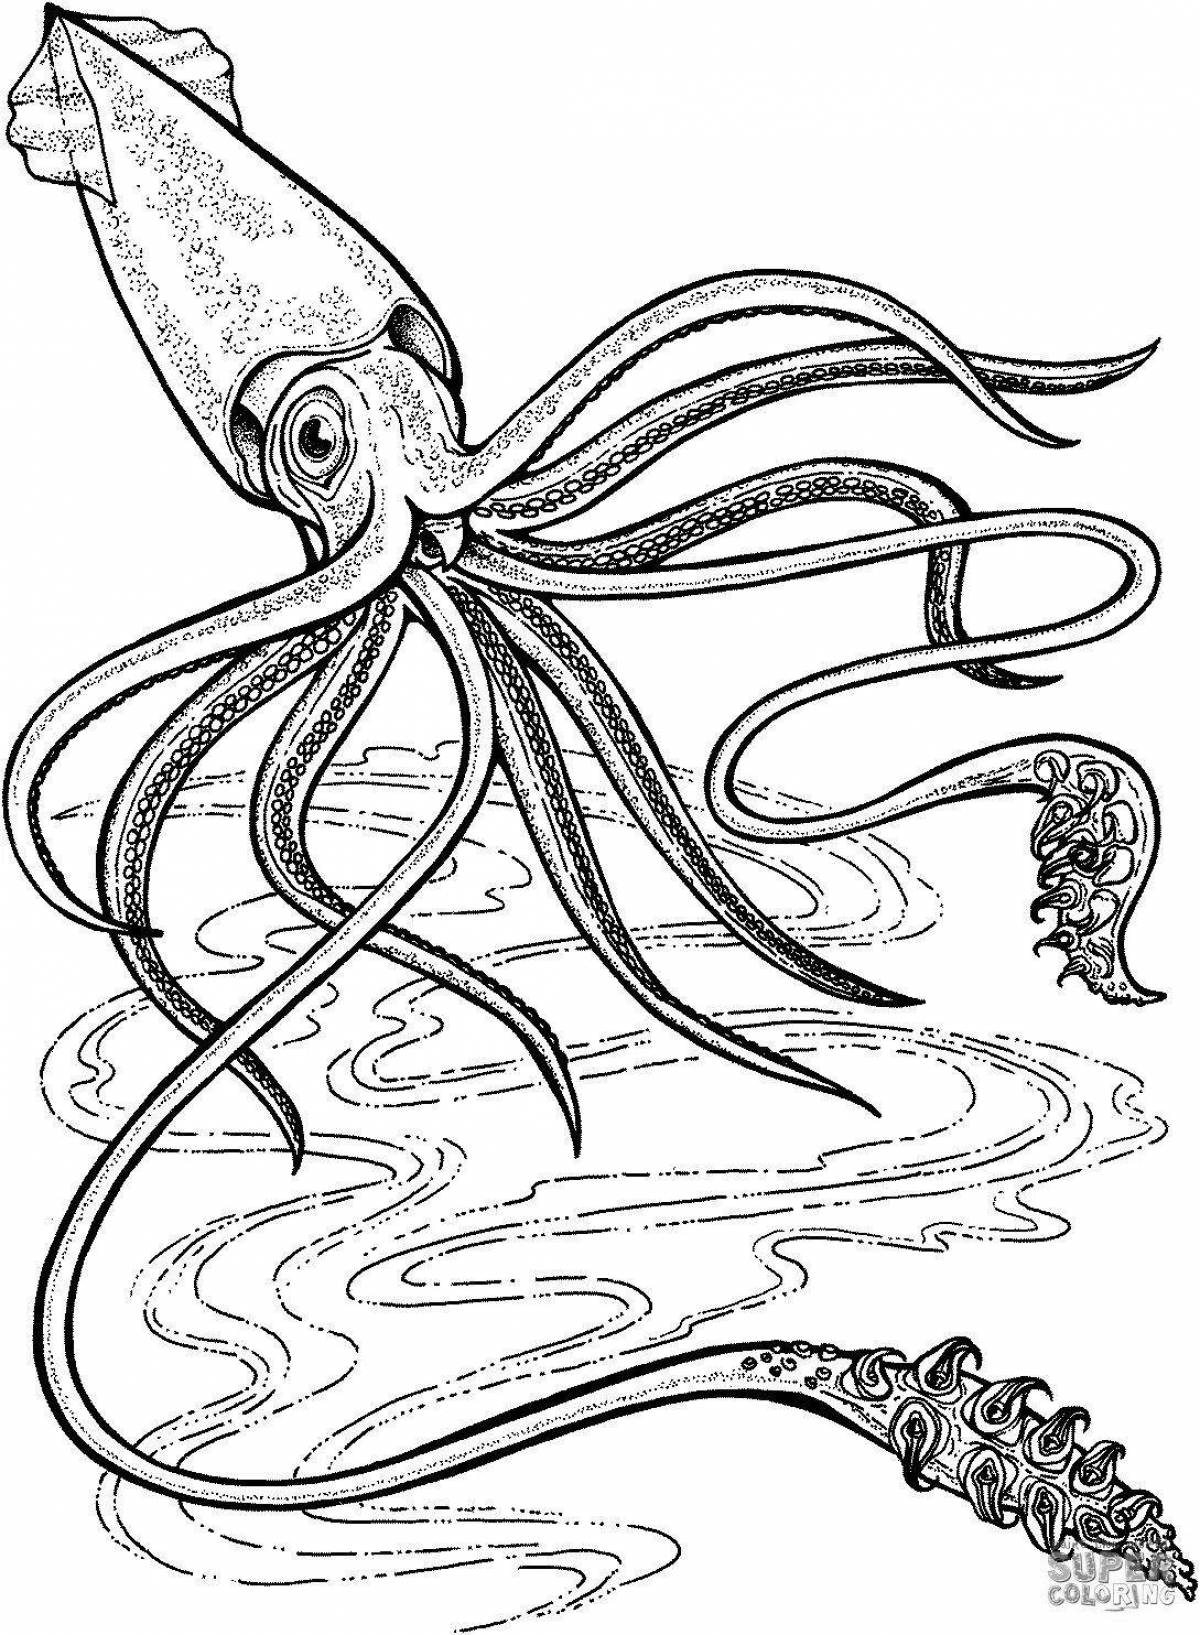 Witty squid coloring for kids